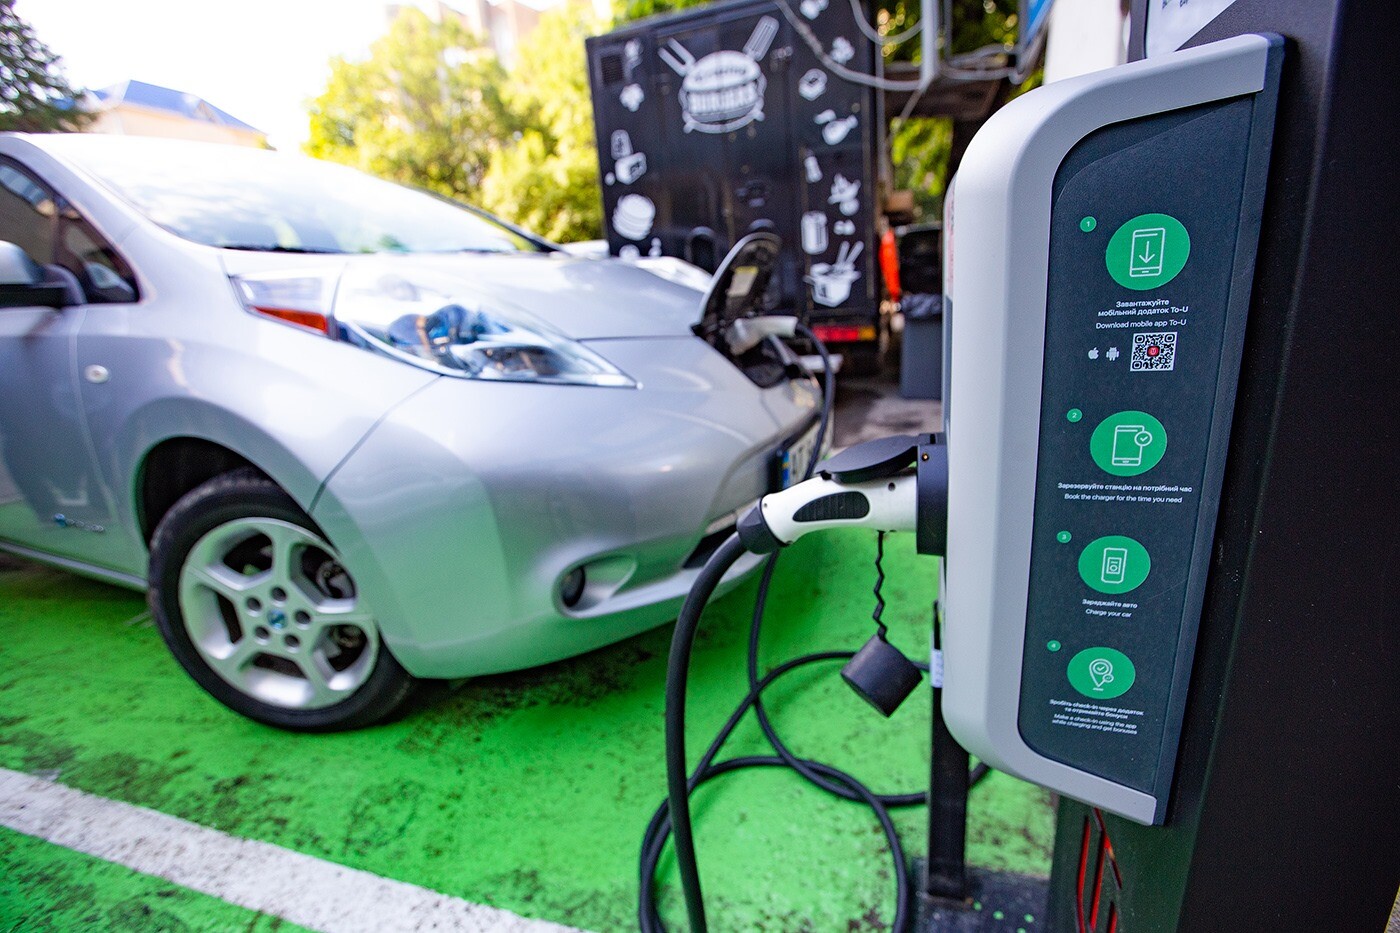 2 charging stations for electric vehicles have been installed in Ivano-Frankivsk